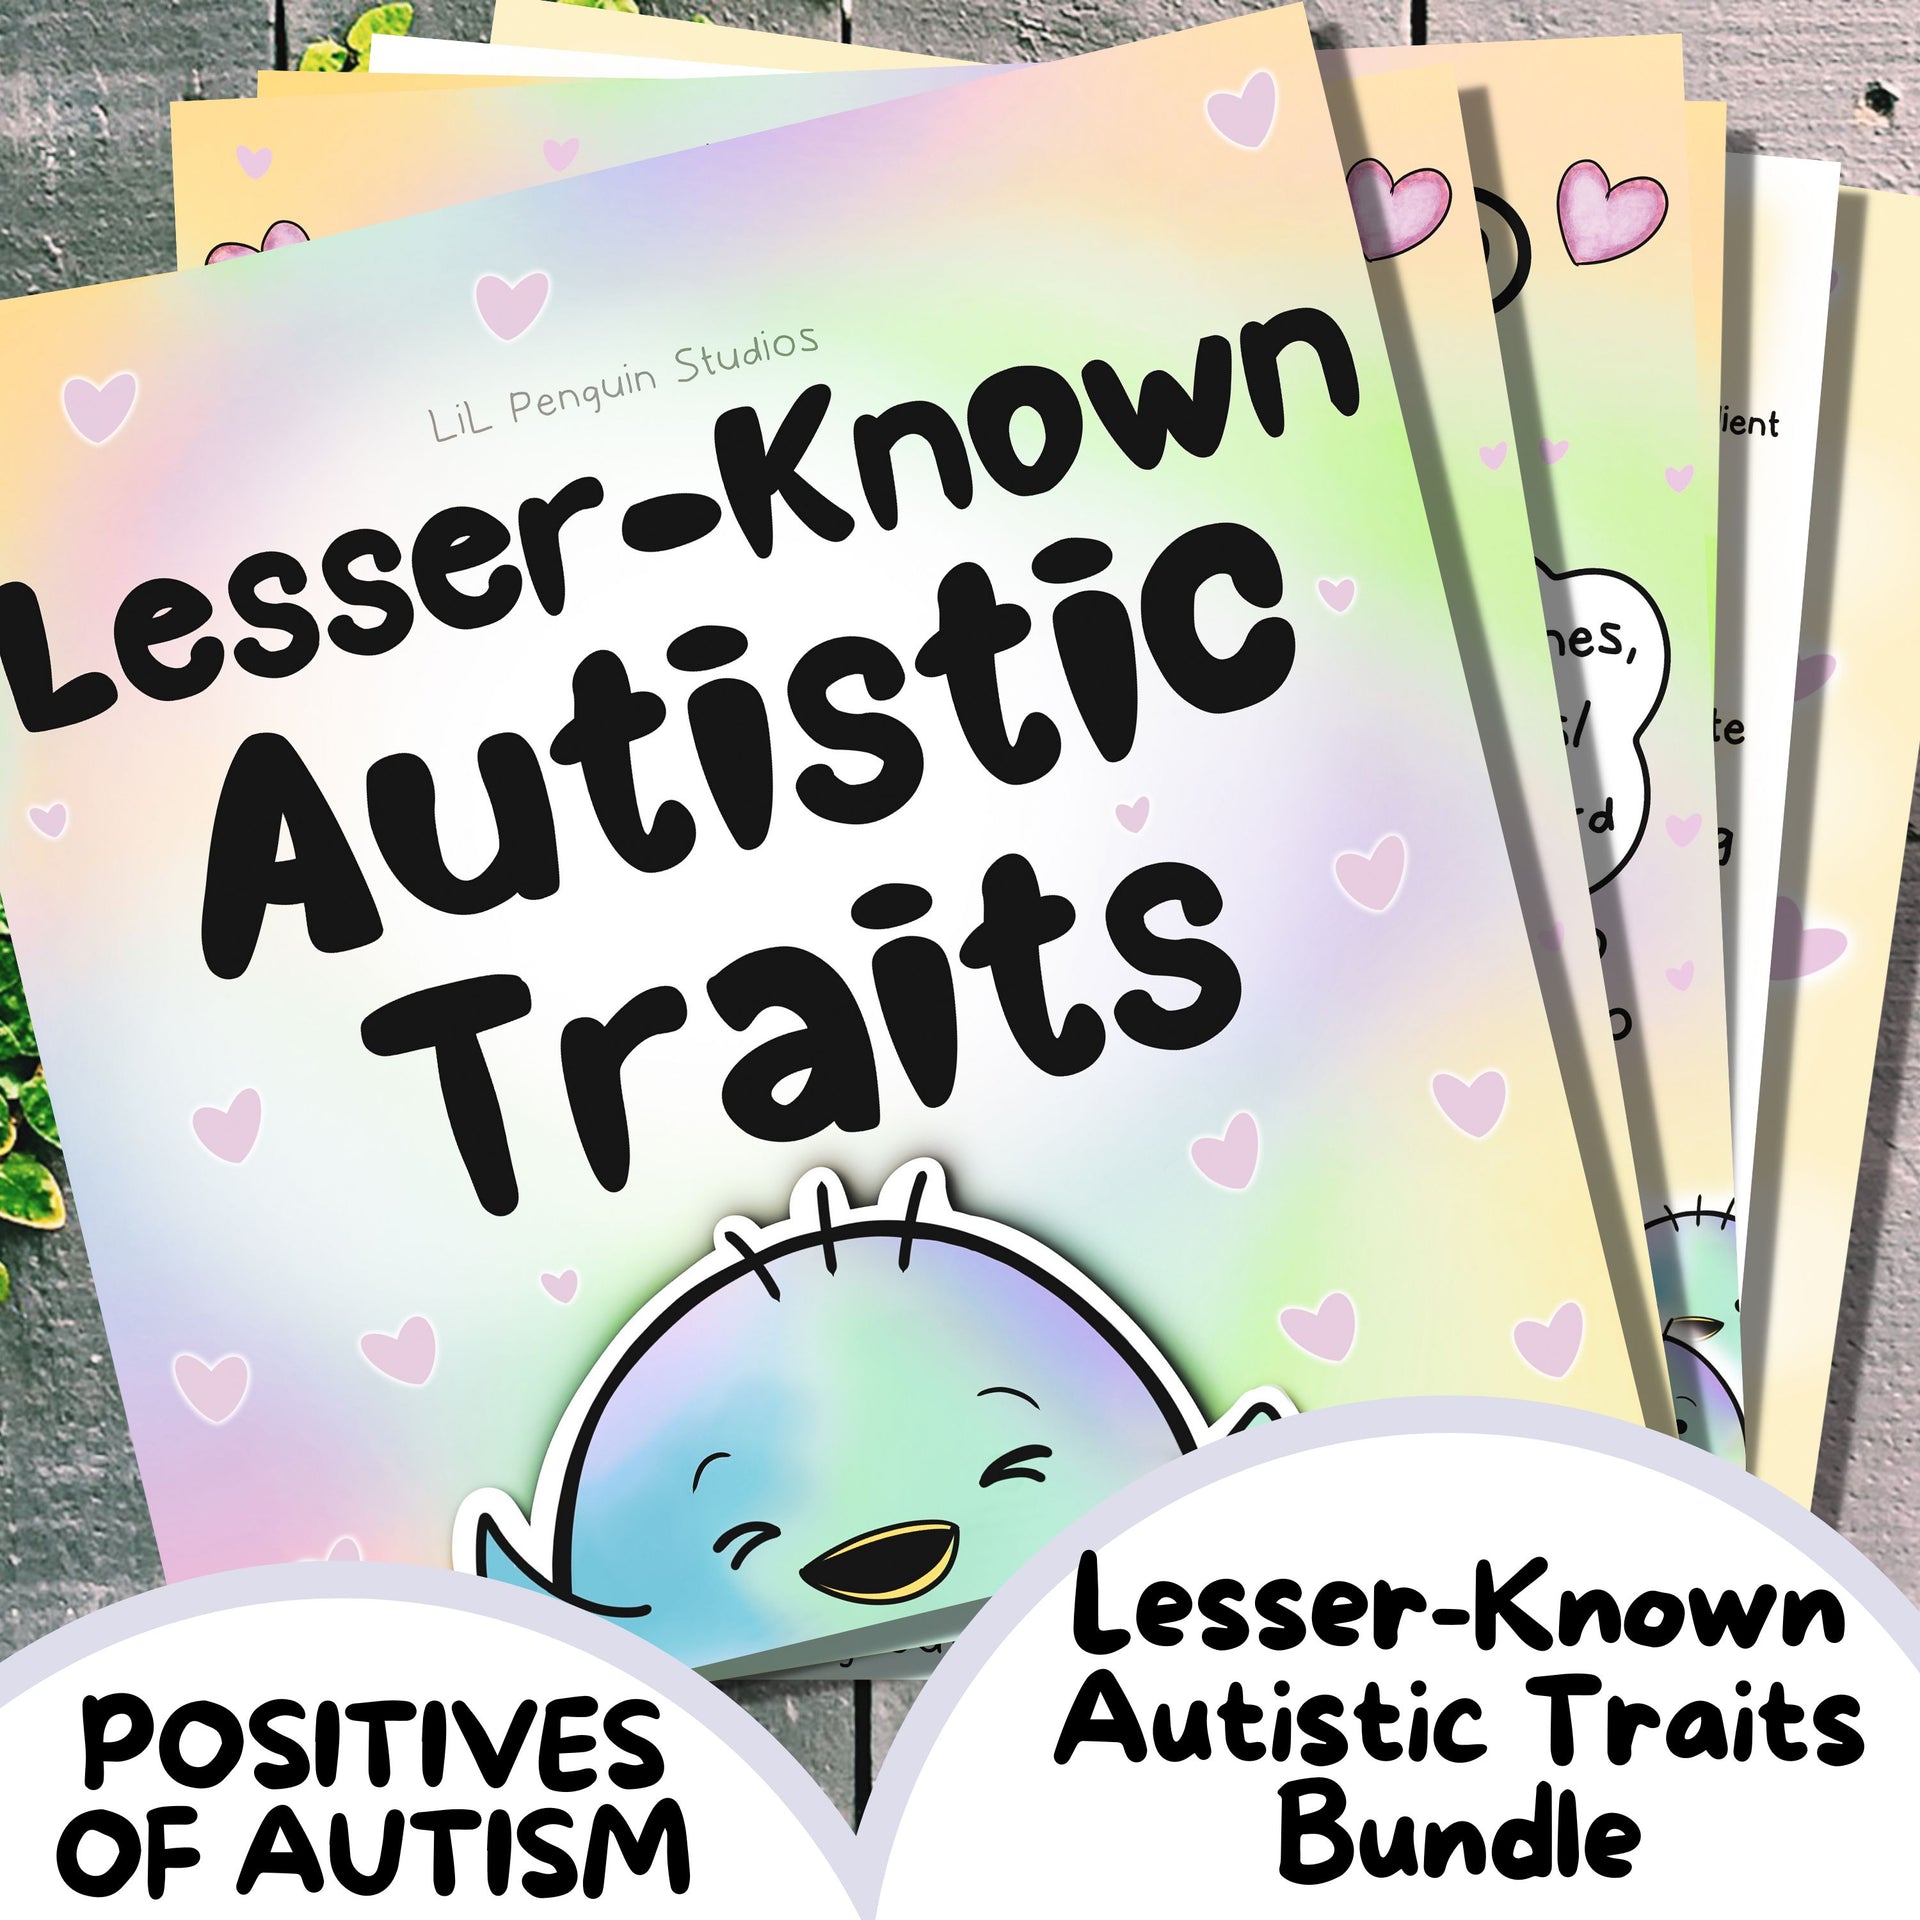 Sixgill Fishing Products - Sixgill Cares - Autism Awareness   The demand for  the Autism Awareness products we created alongside Autism Anglers to raise  autism awareness and acceptance has been